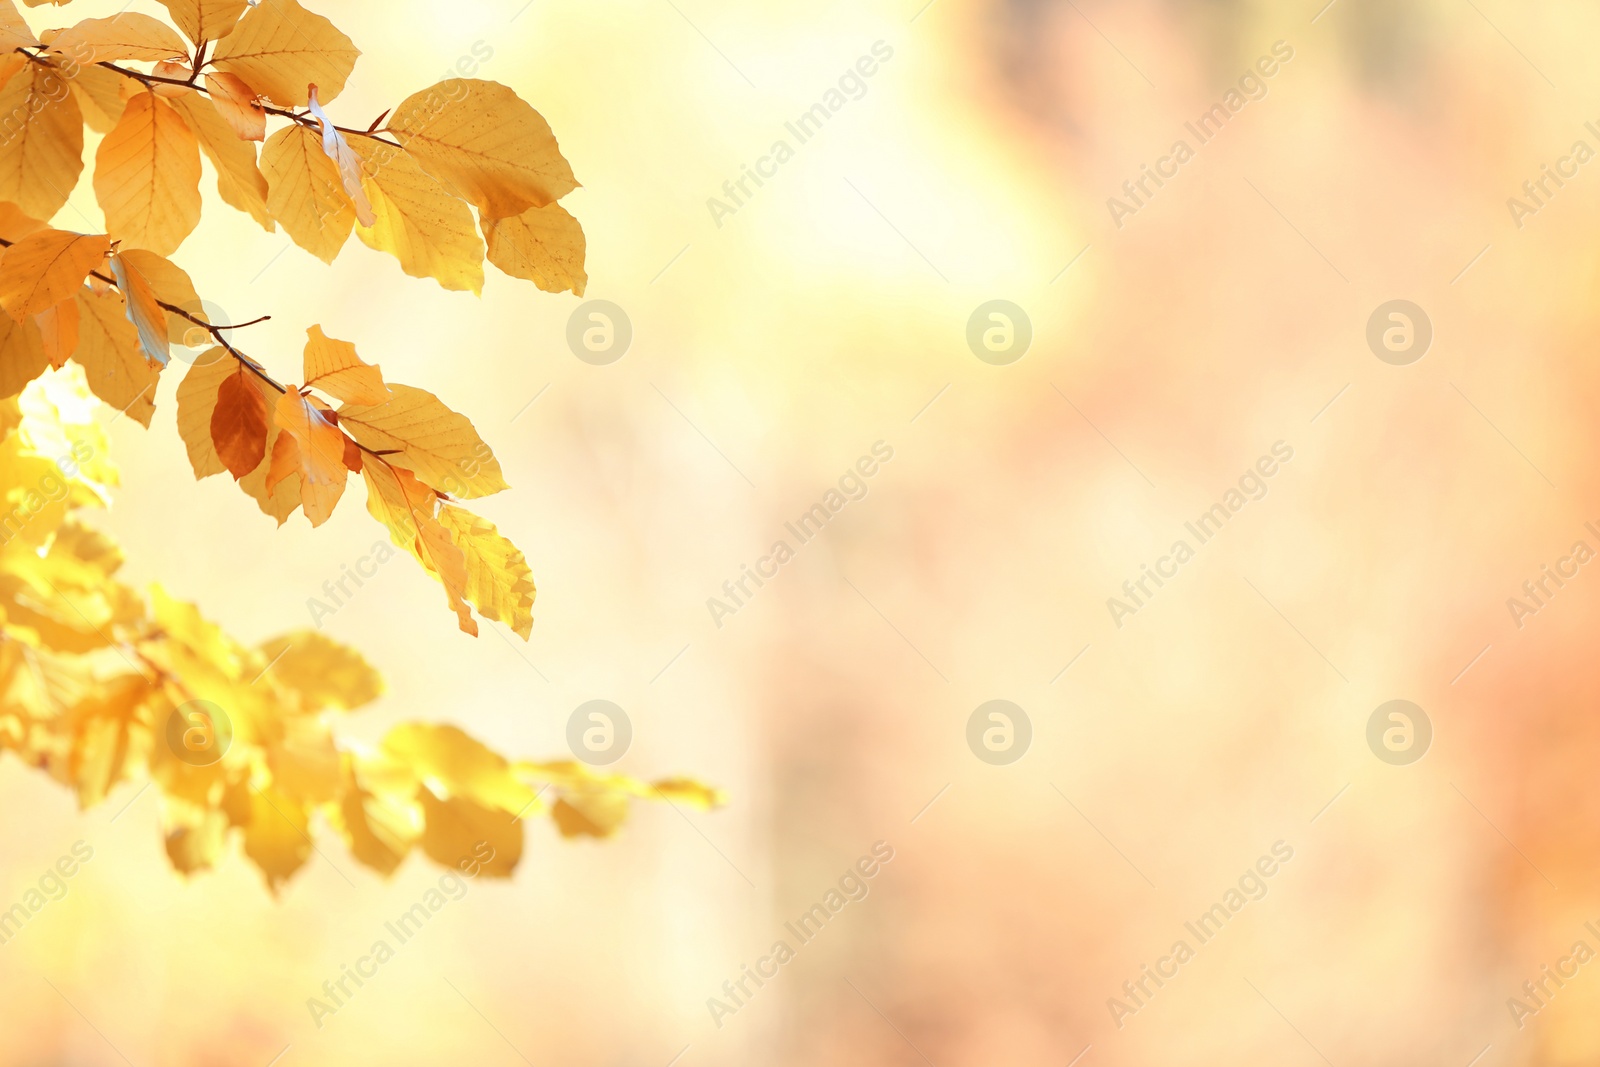 Photo of Tree twigs with autumn leaves on blurred background. Space for text